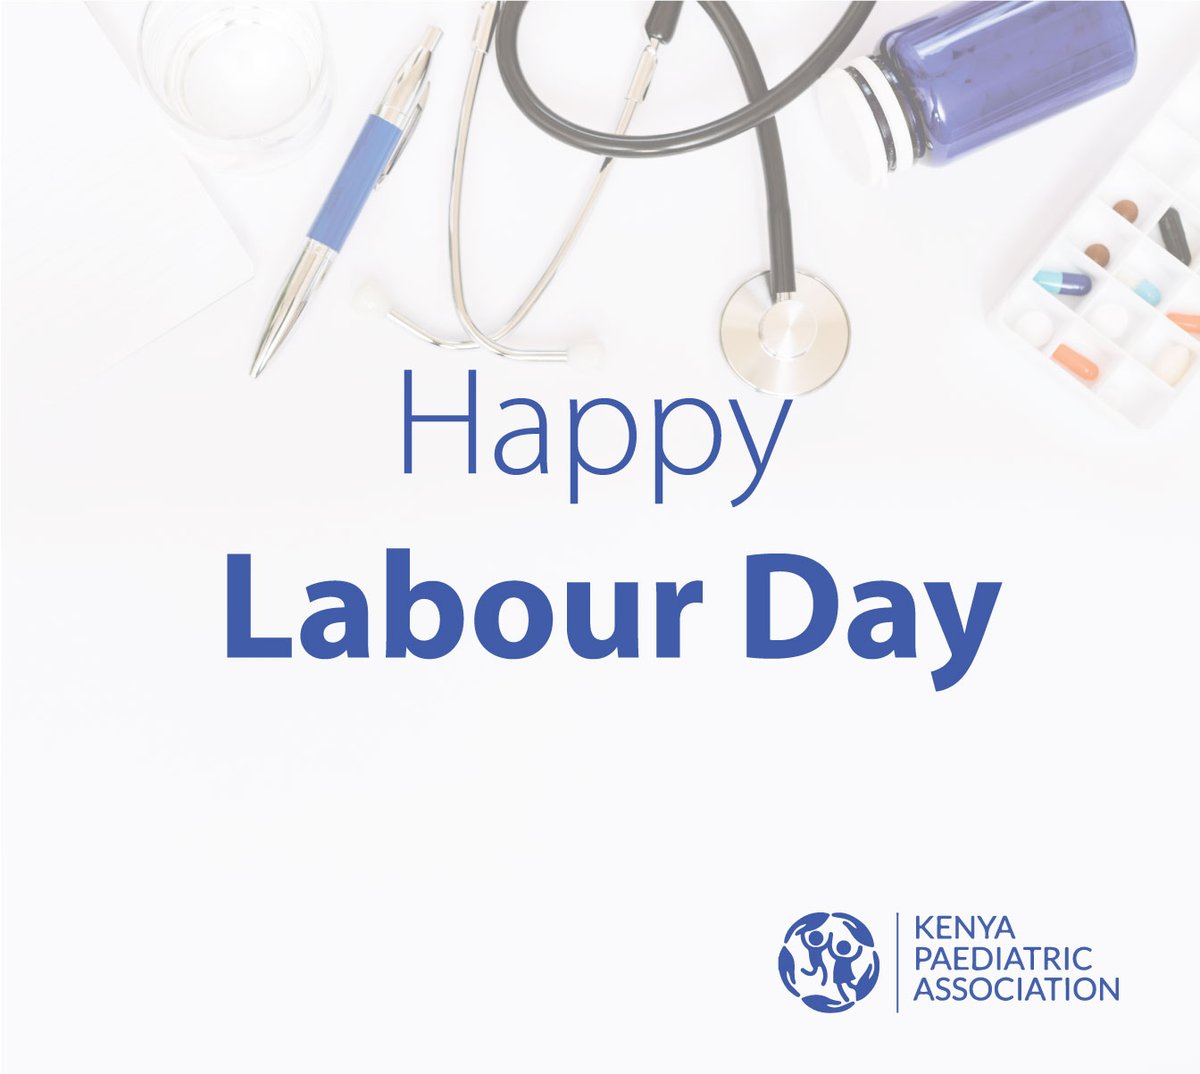 Wishing you a happy Labour Day!